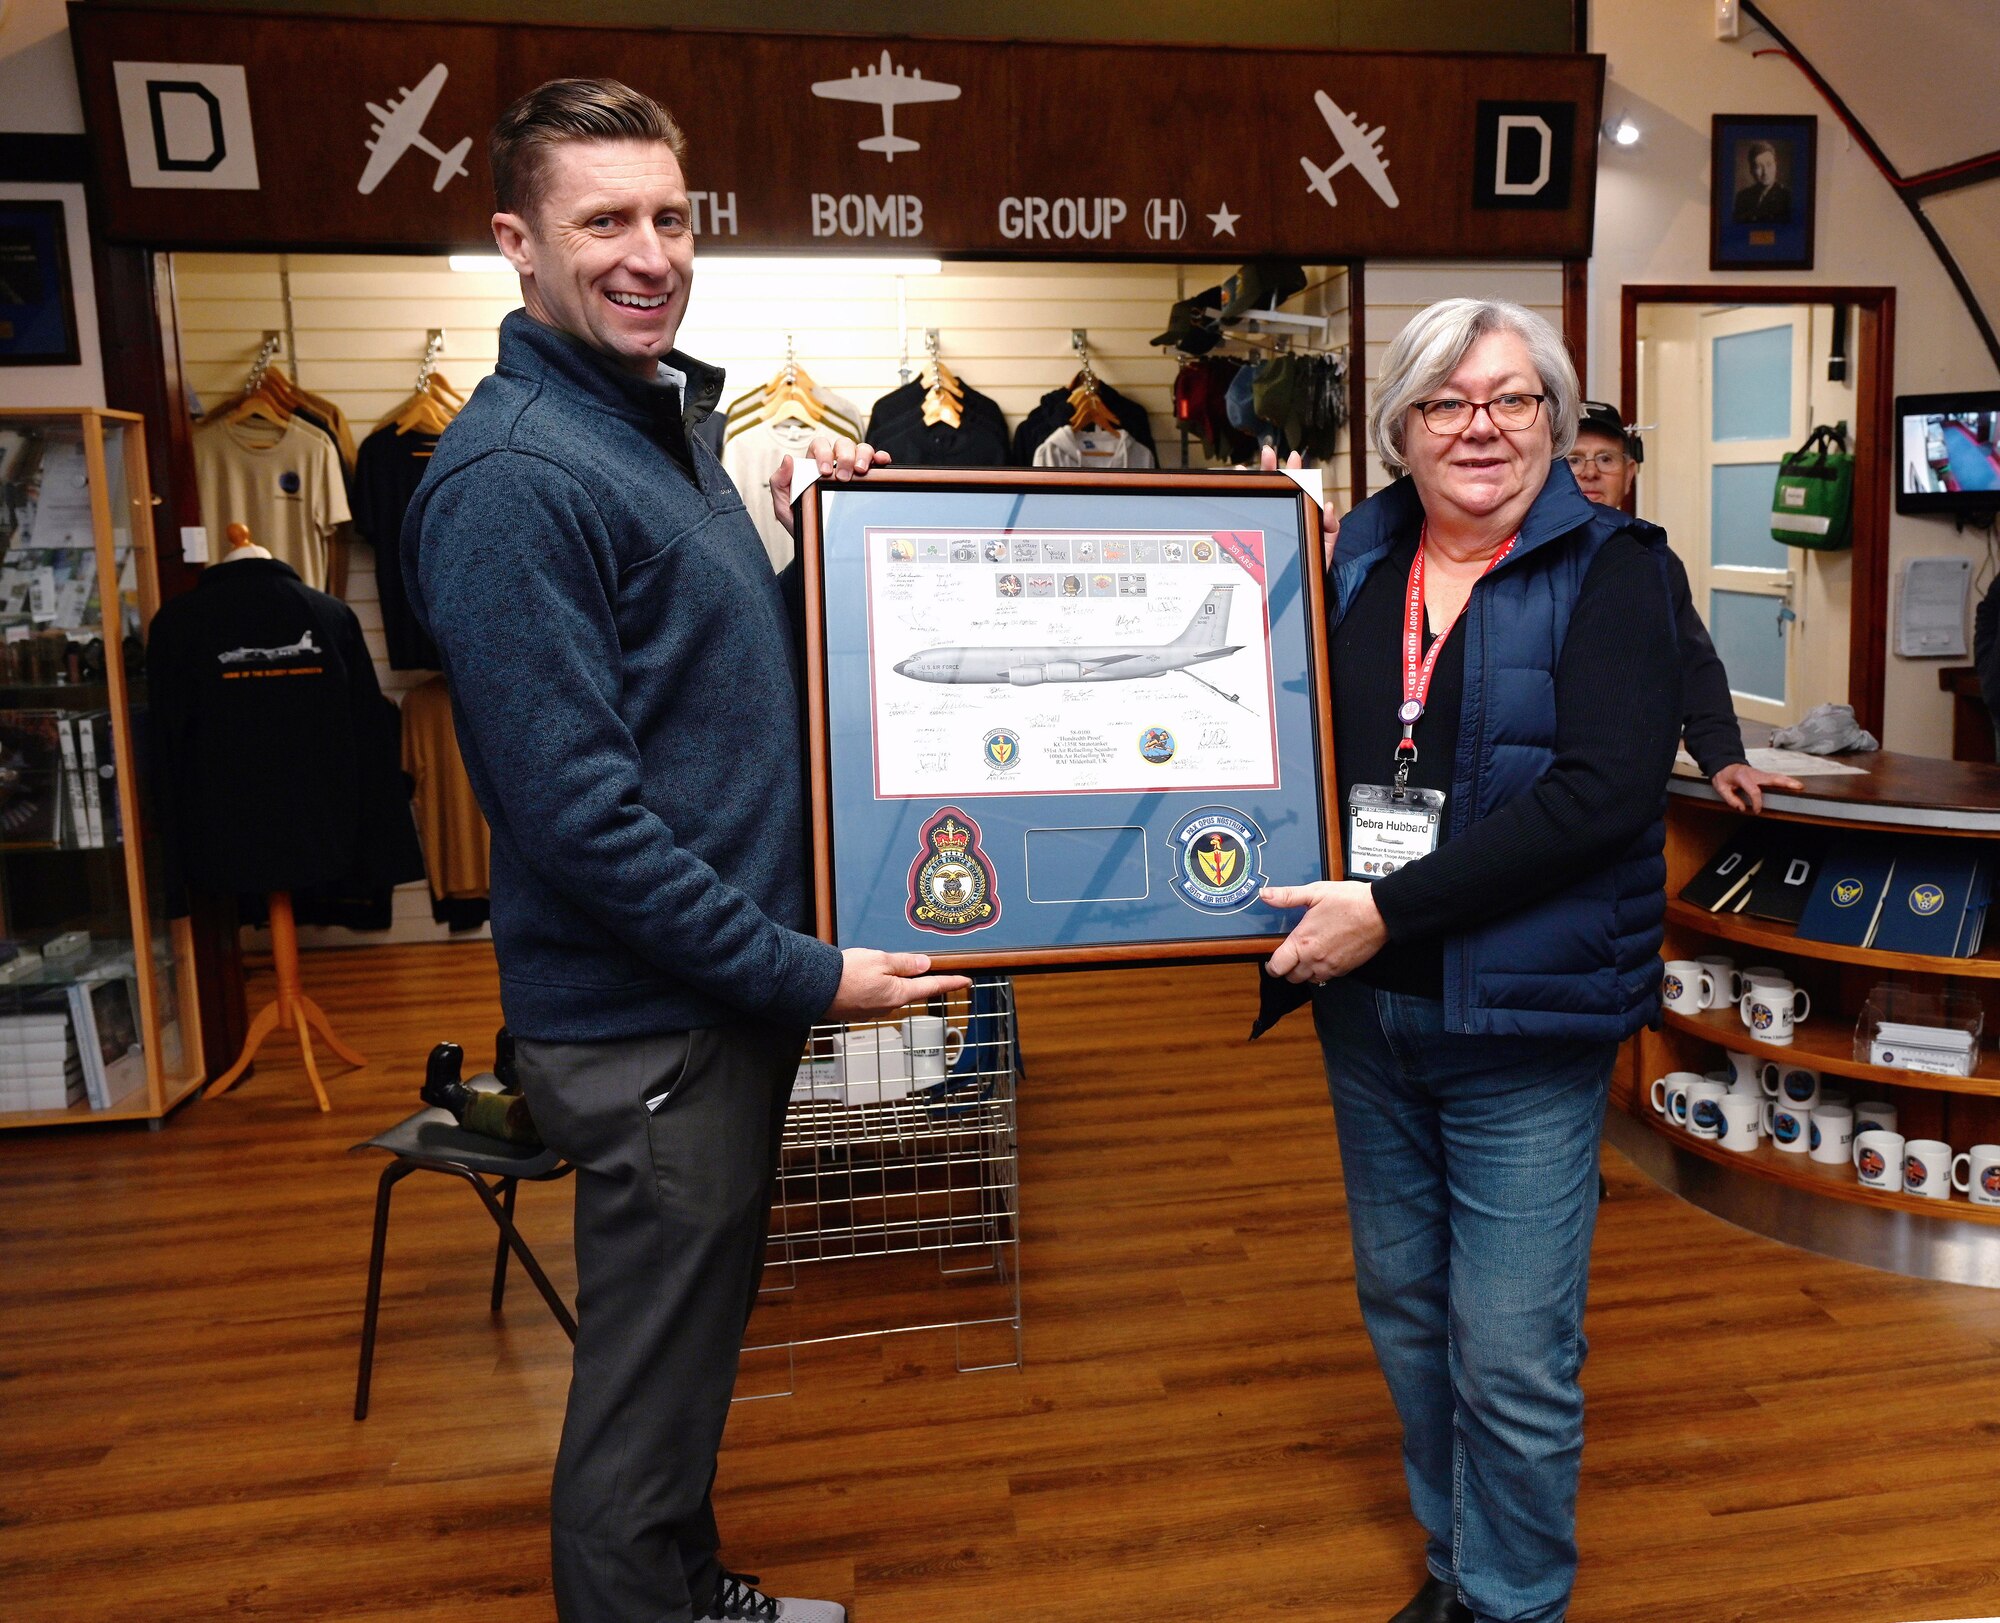 U.S. Air Force Col. Ryan Garlow, 100th Air Refueling Wing commander, left, presents a lithograph of a KC-135 Stratotanker to Debra Hubbard, 100th Bomb Group Memorial Museum chair of trustees, at Thorpe Abbotts, Norfolk, England, Dec. 4, 2023. Base leadership from Royal Air Force Mildenhall spent time at the museum for an off-site meeting, followed by a tour to learn more about the heritage of the 100th ARW. (U.S. Air Force photo by Karen Abeyasekere)